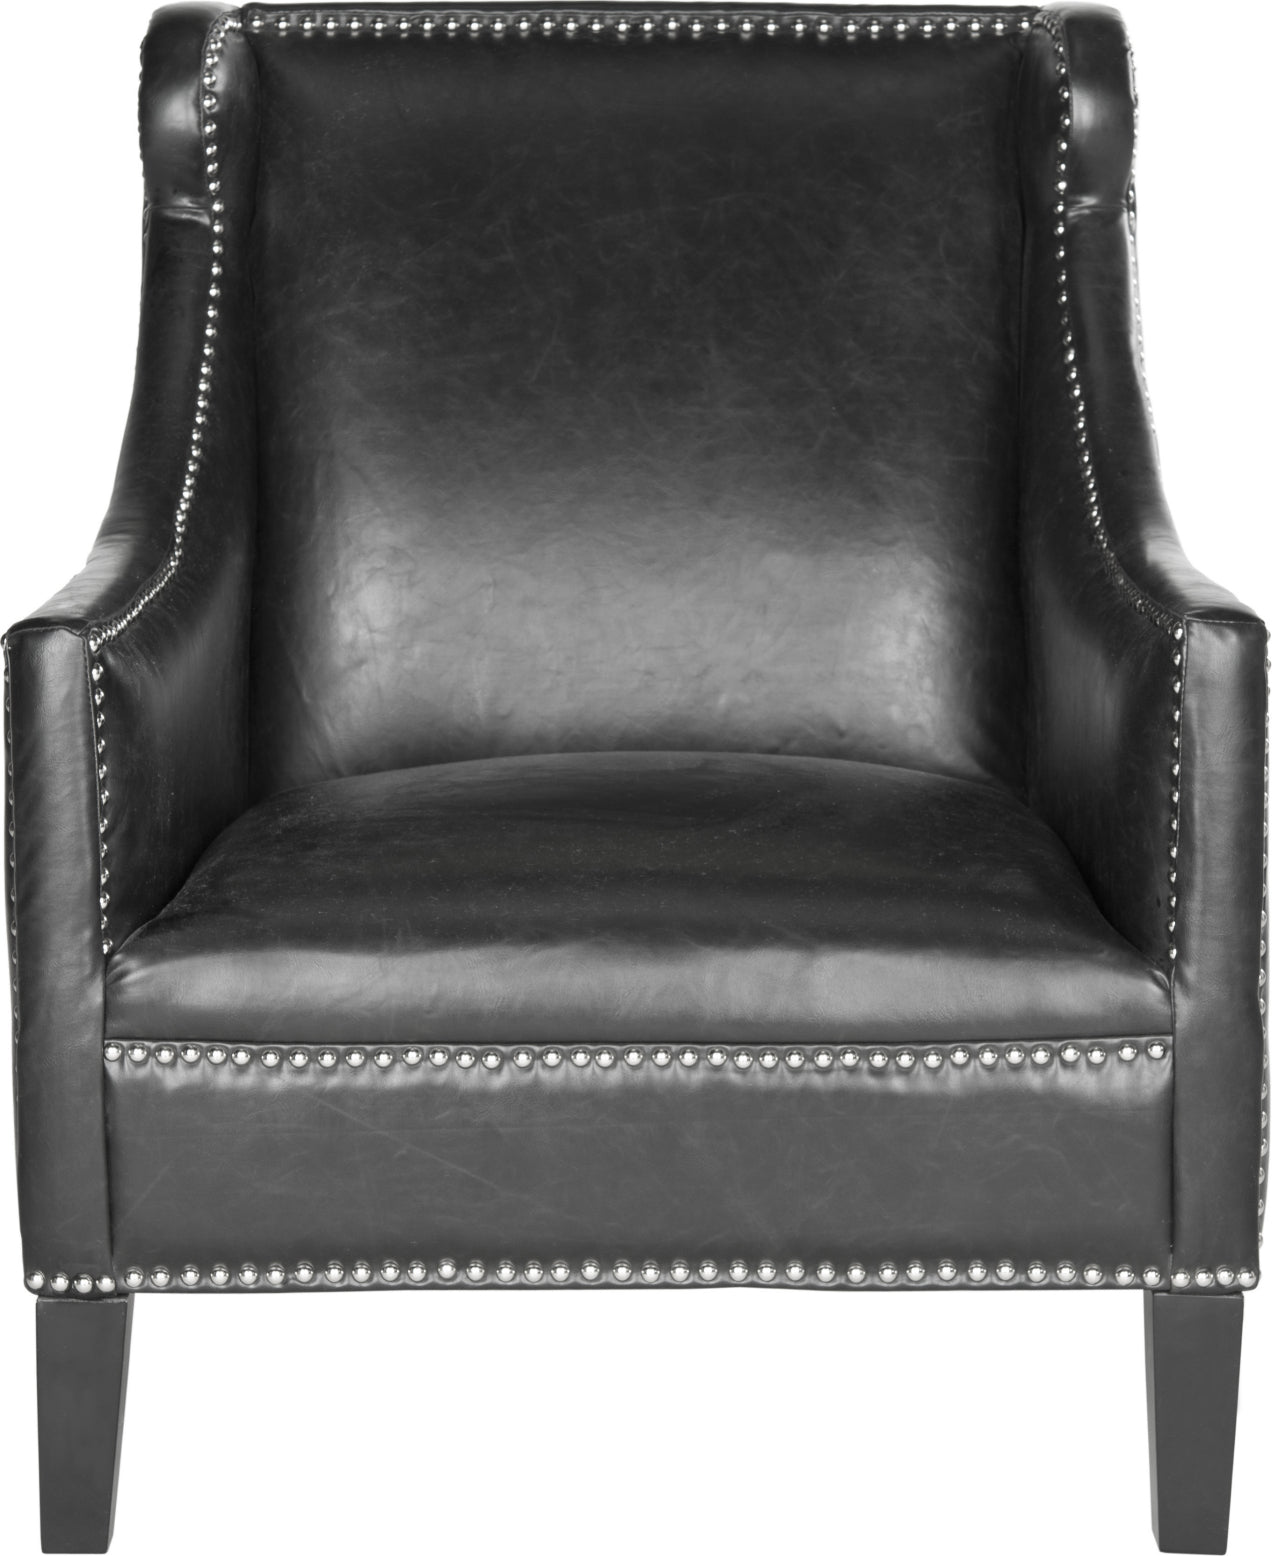 Safavieh Mckinley Leather Club Chair-Silver Nail Heads Antique Black and Furniture main image